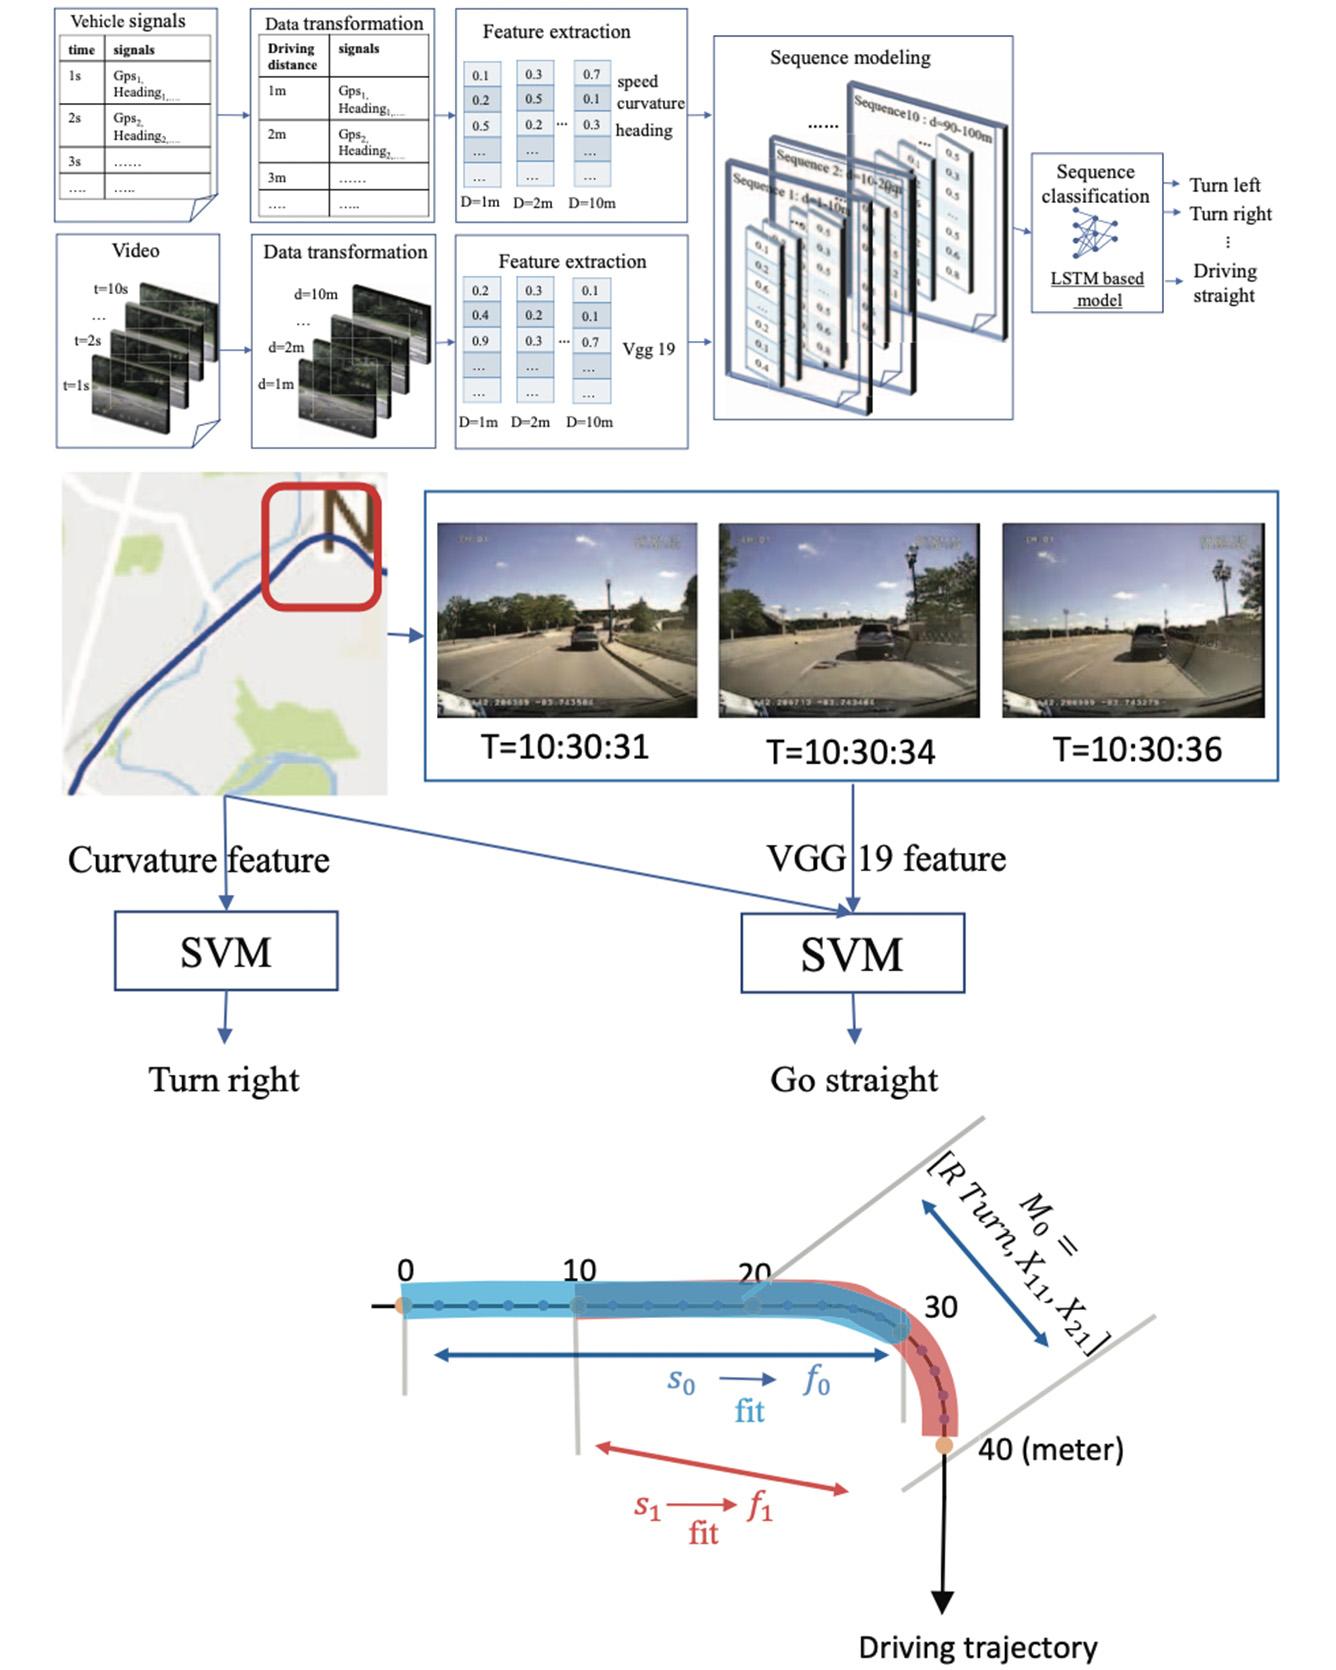 Driving Maneuver Detection via Sequence Learning from Vehicle Signals and Video Images